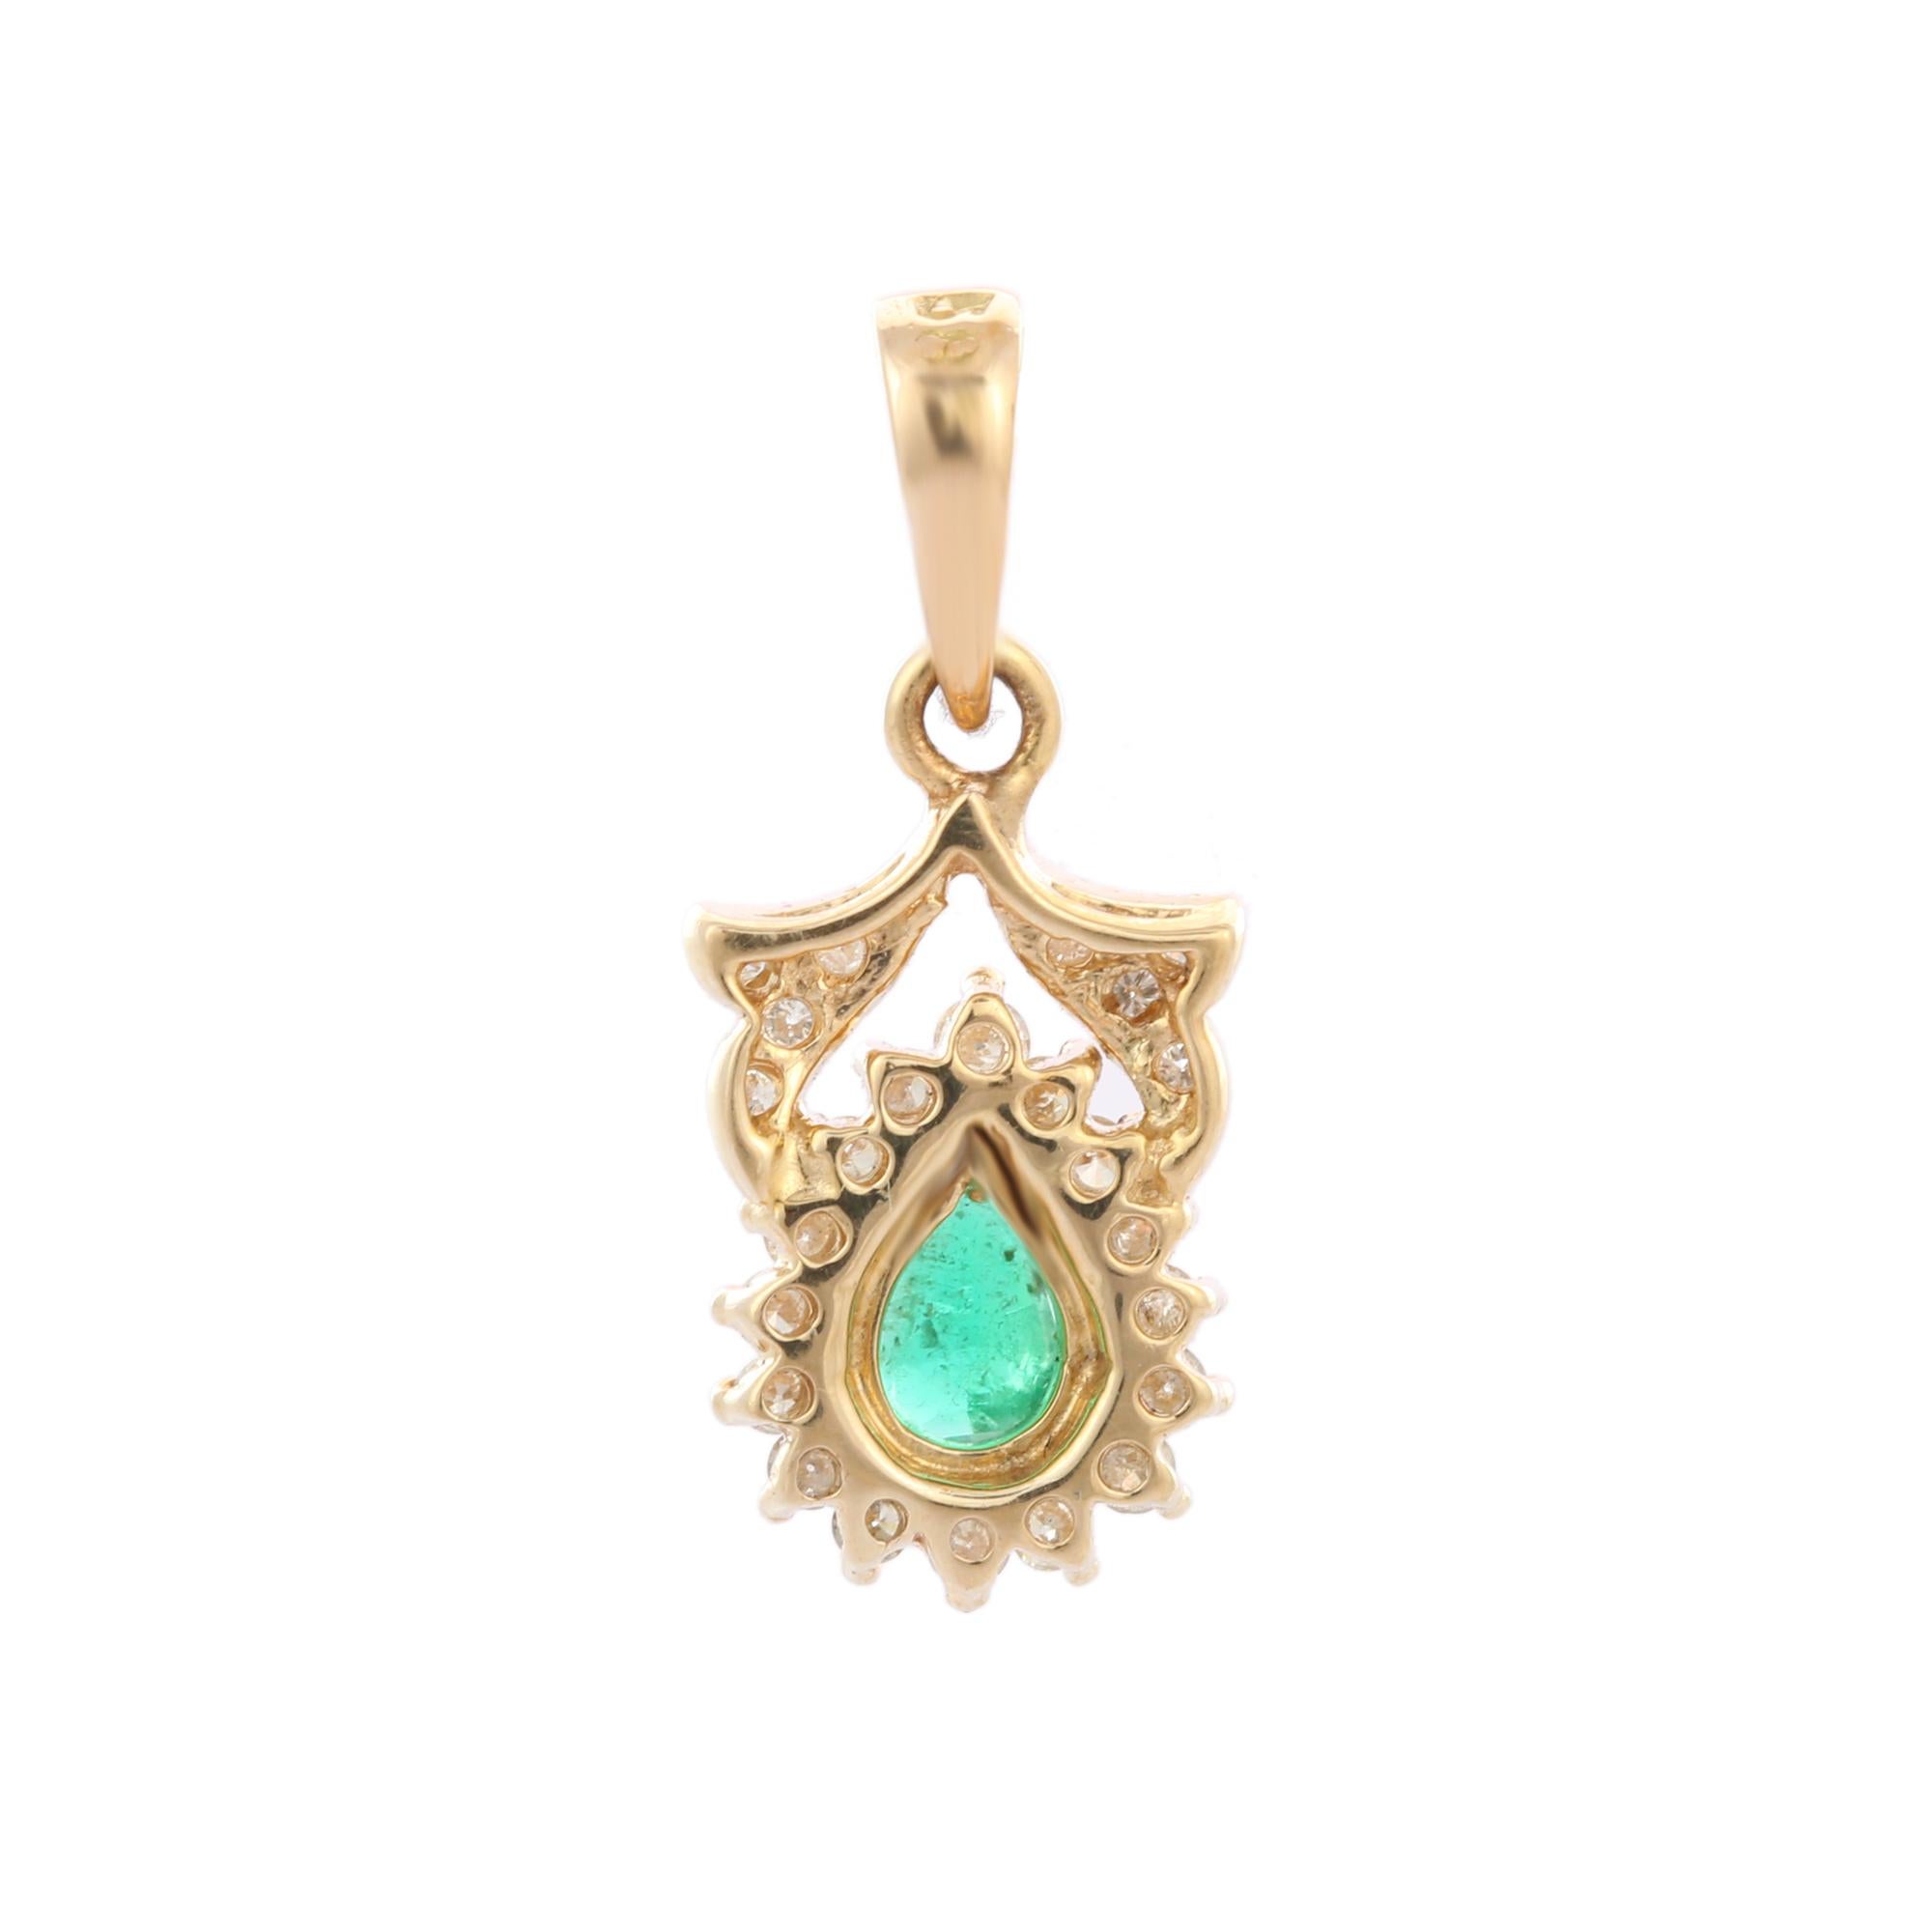 Art Deco Pear Cut Emerald Diamond Pendant 14k Yellow Gold, Bride To Be Gift For Women For Sale